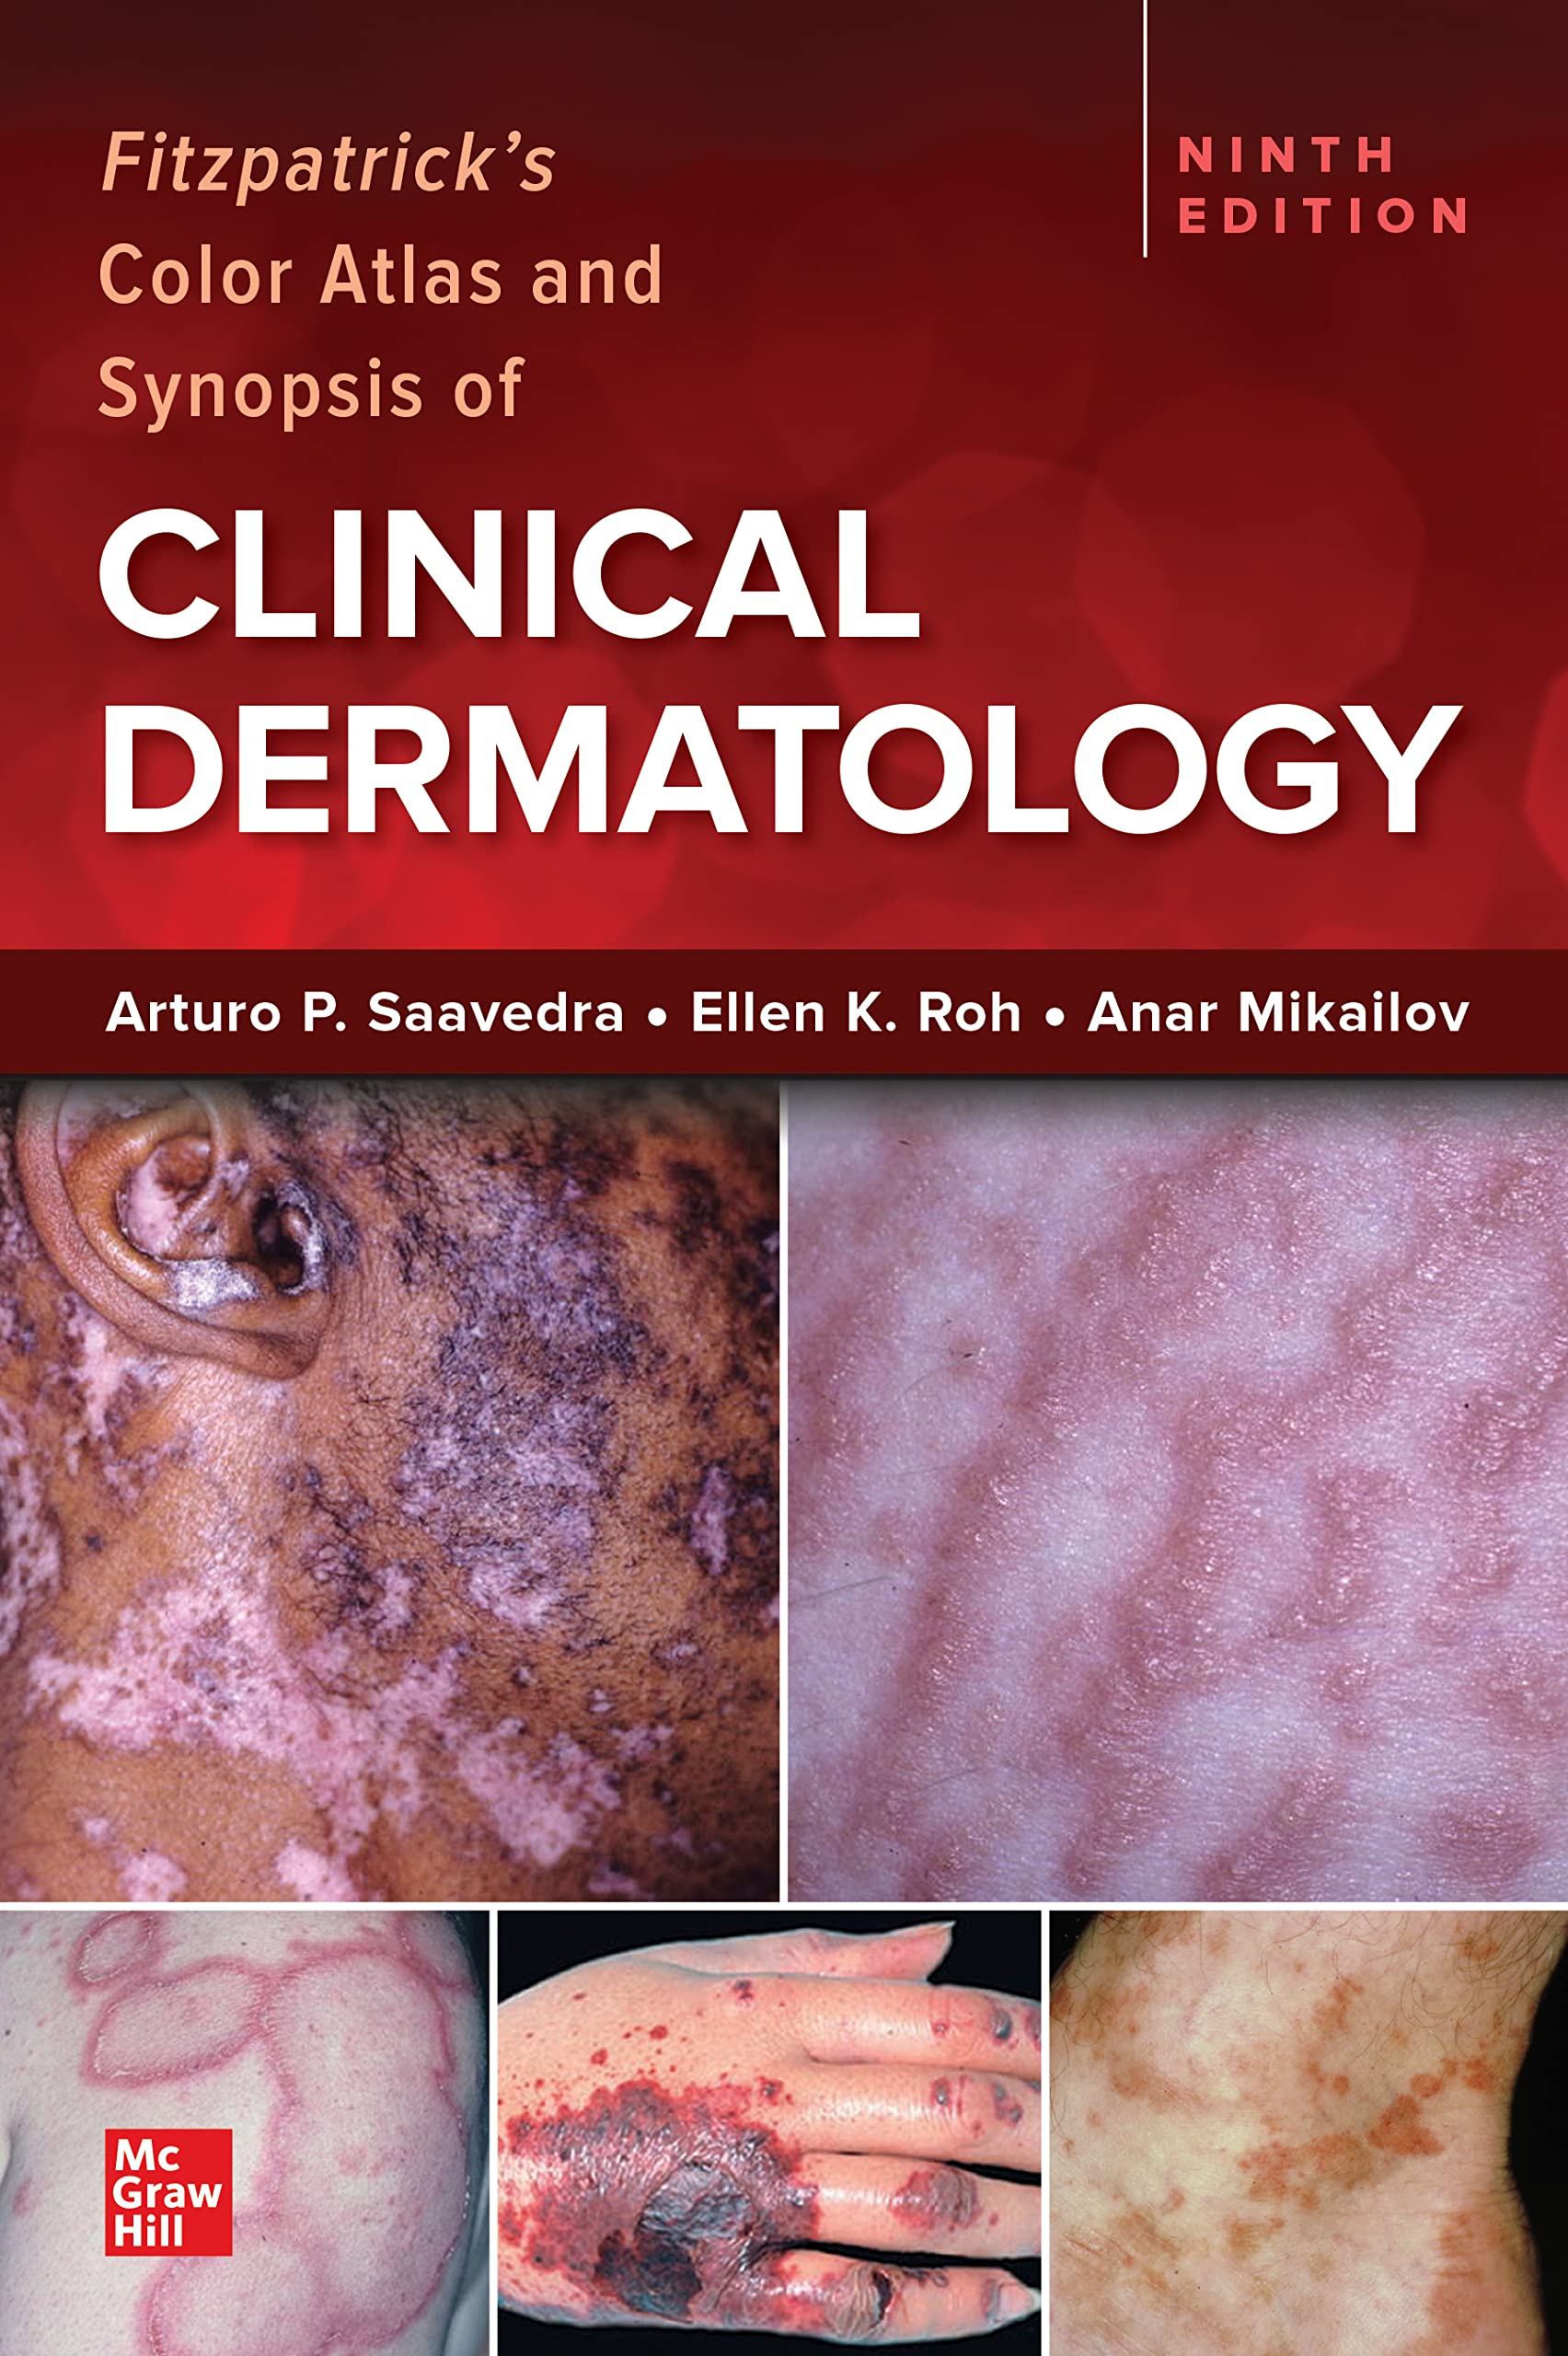 Dermatology　Book　Medical　Atlas　Synopsis　Prithvi　by　Saavedra　9/E　P.　of　Arturo　2023　Clinical　Color　Fitzpatrick's　Store